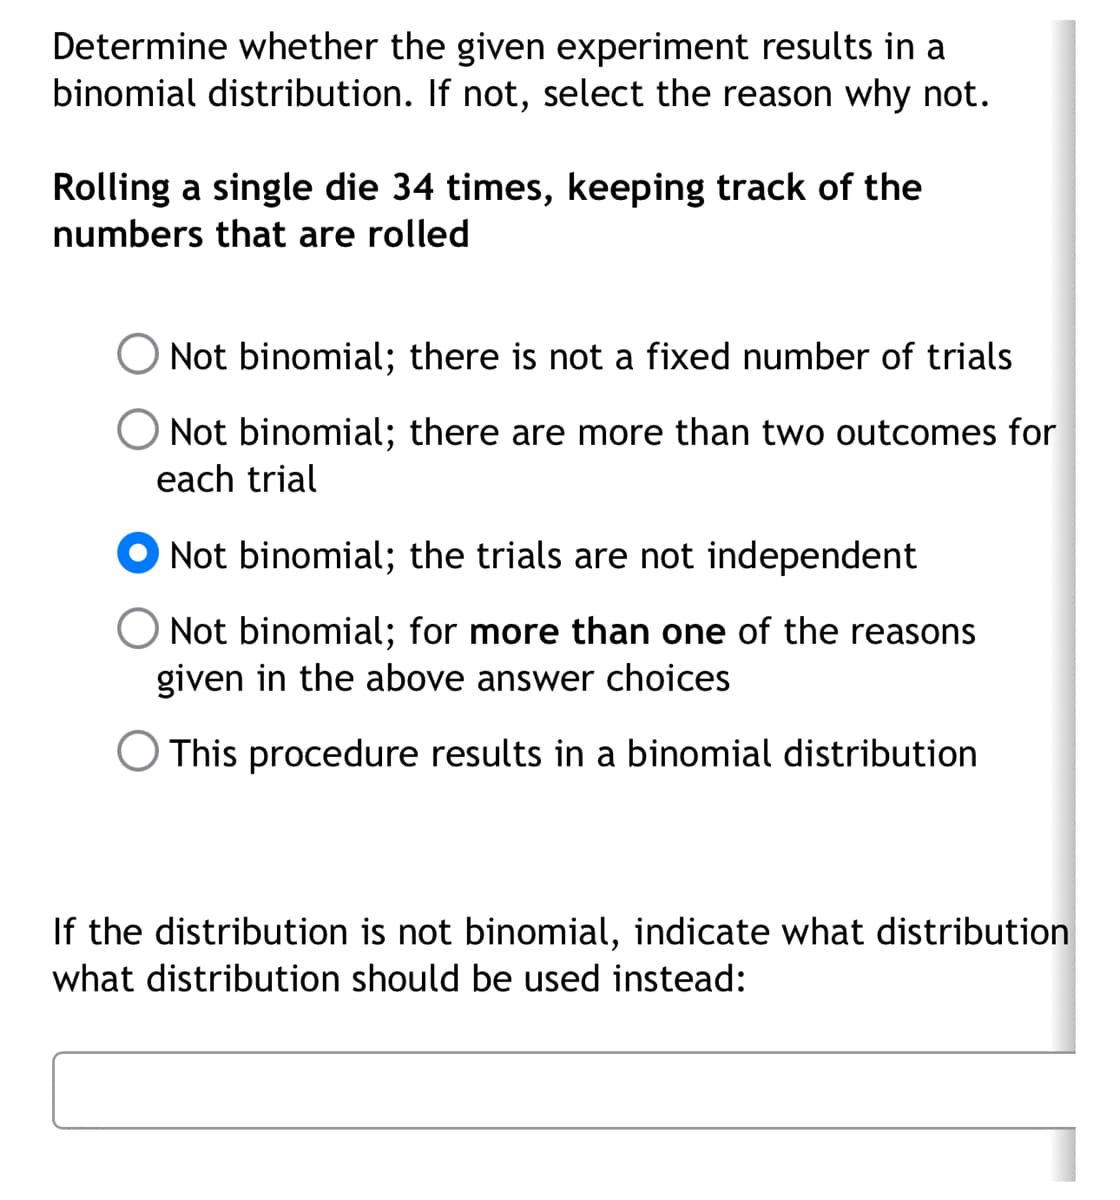 Determine whether the given experiment results in a
binomial distribution. If not, select the reason why not.
Rolling a single die 34 times, keeping track of the
numbers that are rolled
Not binomial; there is not a fixed number of trials
O Not binomial; there are more than two outcomes for
each trial
Not binomial; the trials are not independent
Not binomial; for more than one of the reasons
given in the above answer choices
O This procedure results in a binomial distribution
If the distribution is not binomial, indicate what distribution
what distribution should be used instead: